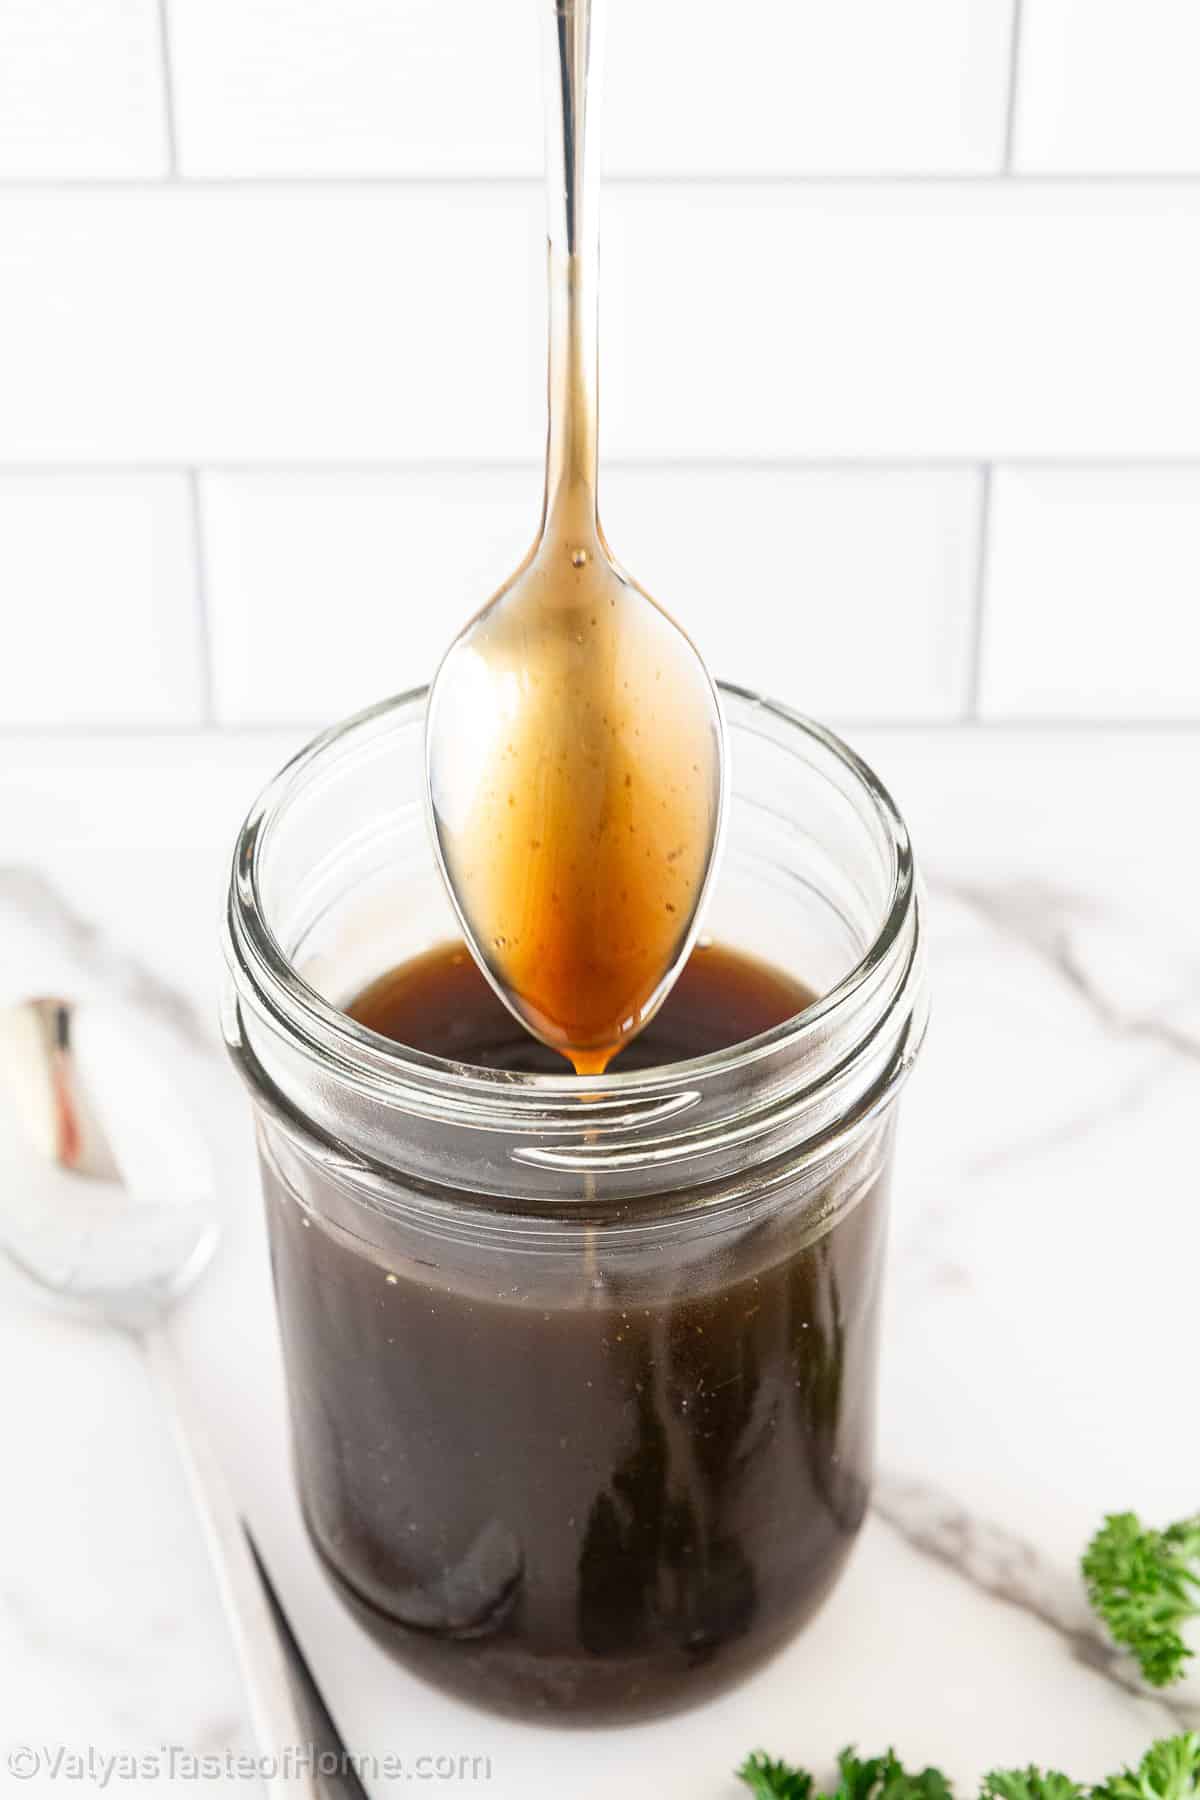 Since it’s a homemade version, it tastes cleaner and has no added preservatives. Make it once, and you’ll never want to buy store-bought teriyaki glaze again!